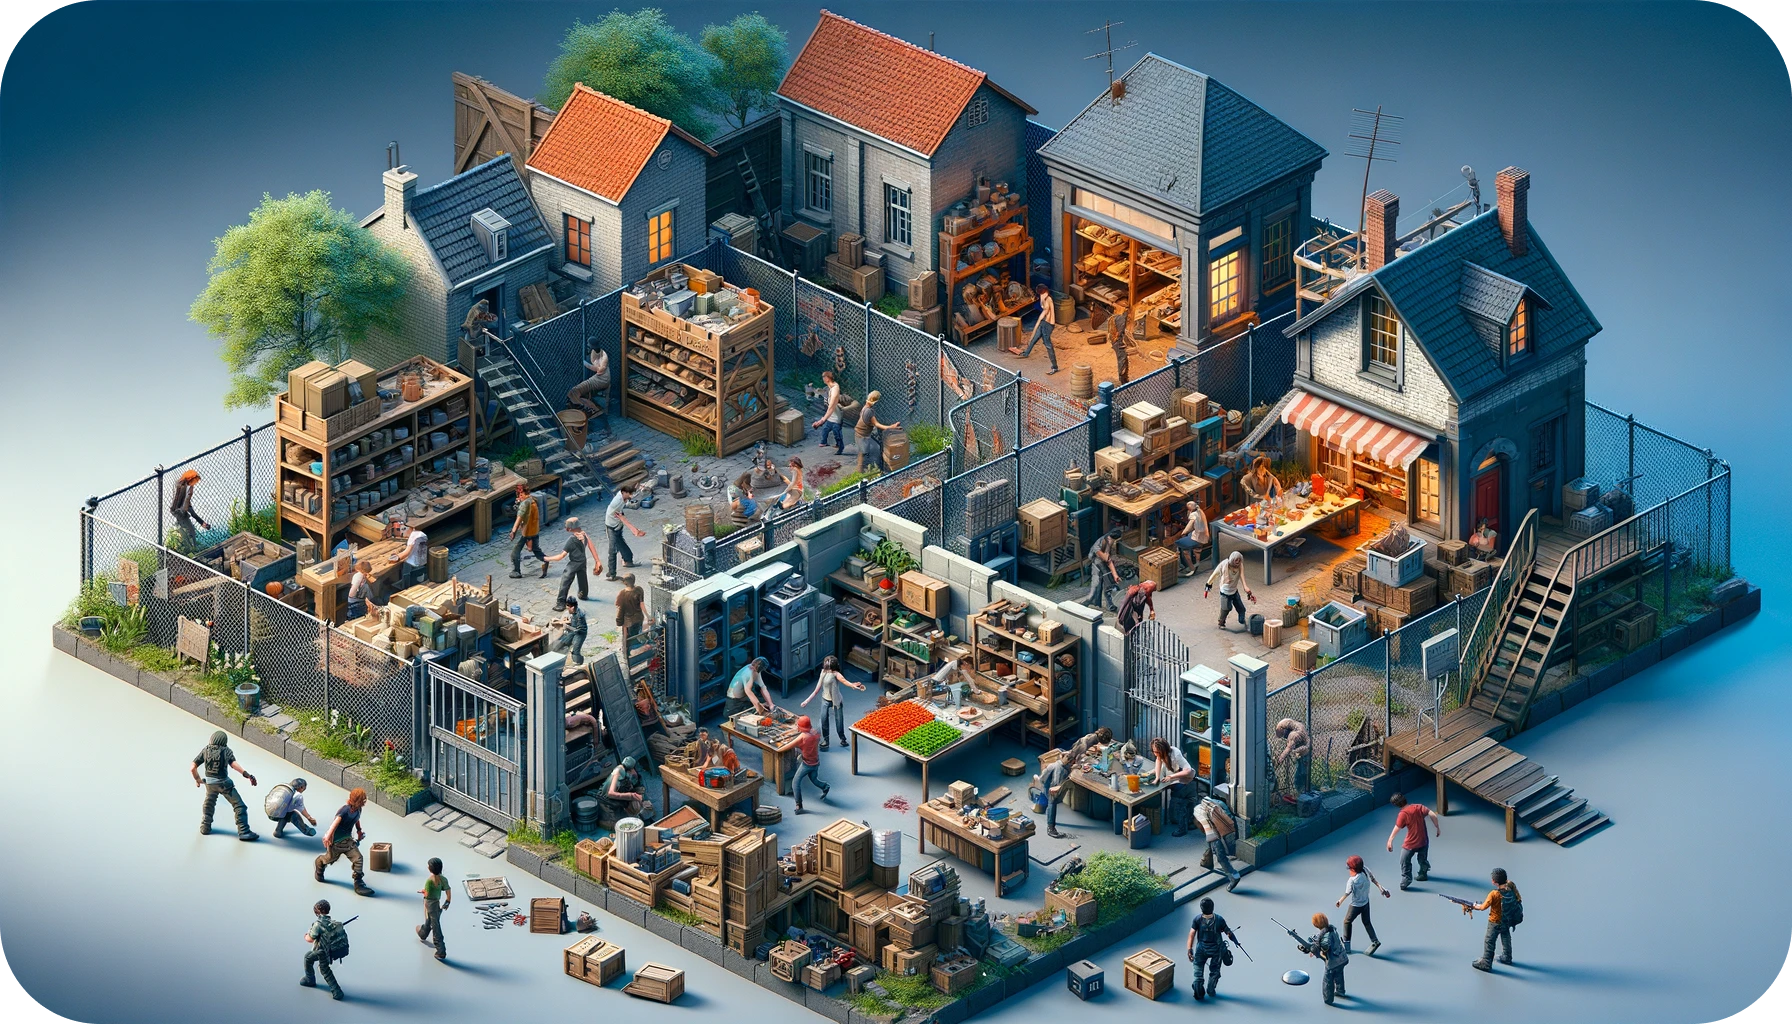 A detailed urban scene emphasizing survival, strategy, and community collaboration as players fortify shops and houses, prepare defenses, and work together.